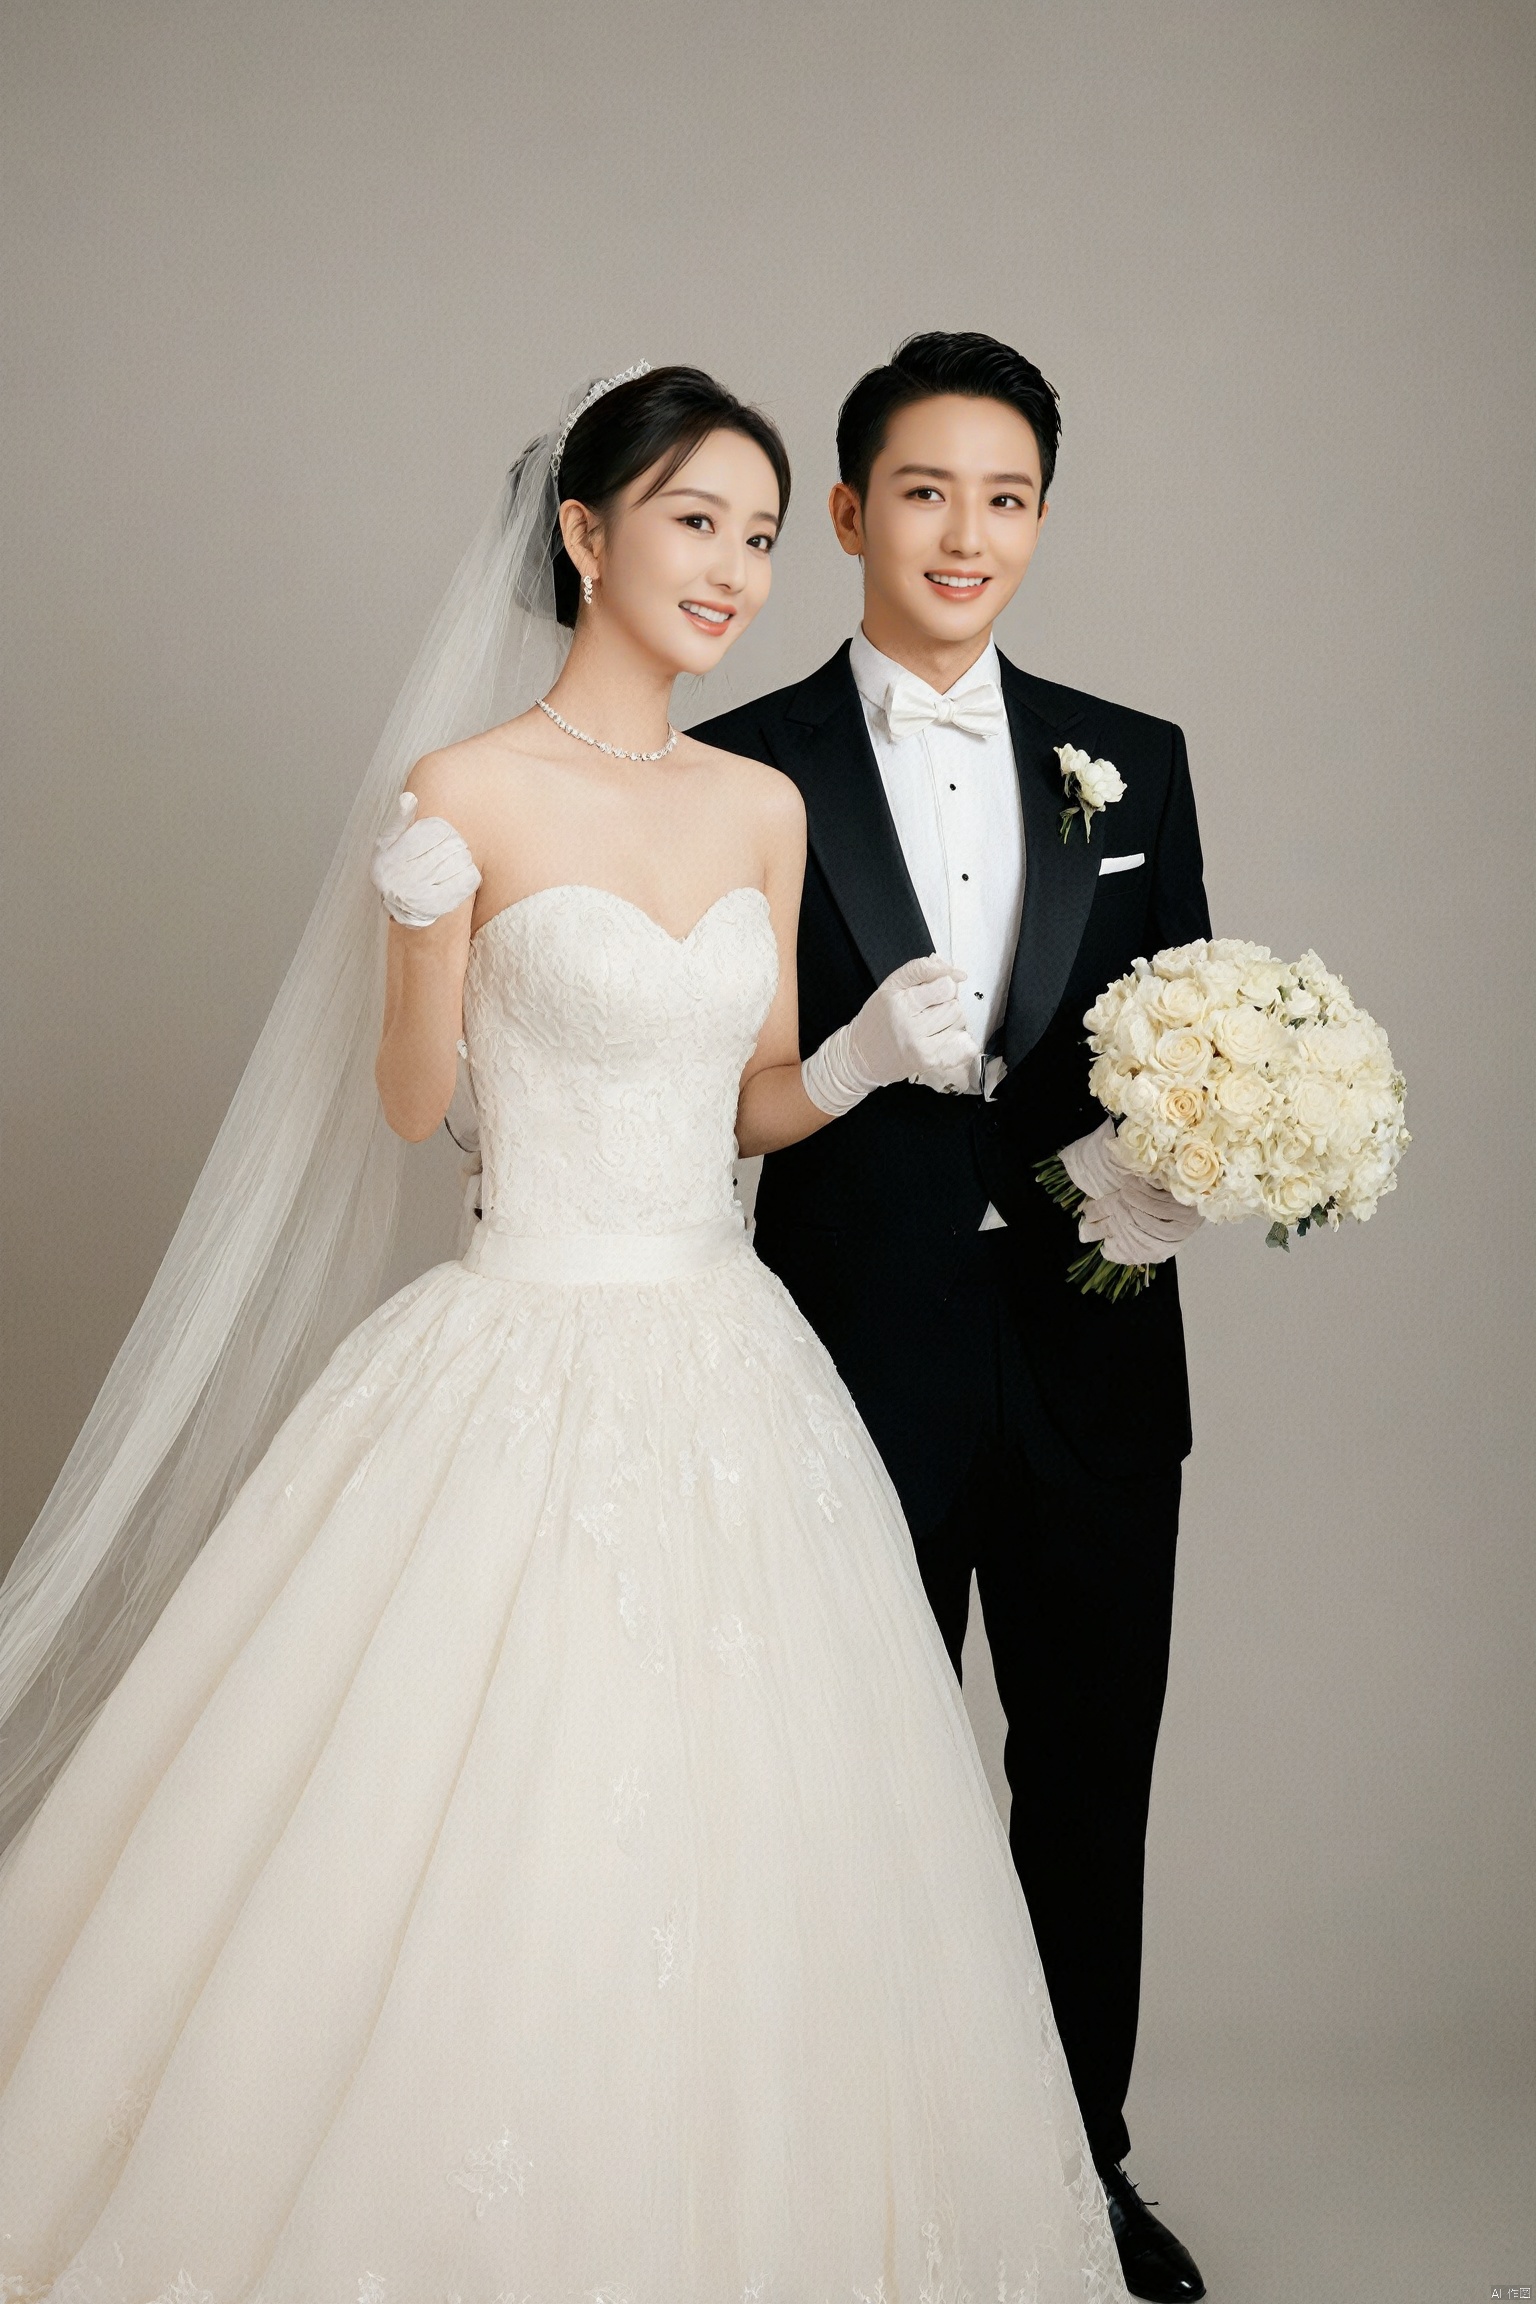  wedding attire,couple,bride,groom,wedding gown,tuxedo,bridal veil,gloves,bouquet,happy expression,posing,studio portrait,elegance,formal wear,Asian ethnicity,side glance,romantic,standing pose,timeless,sophisticated,muted colors,soft lighting,textured background,, masterpiece,best quality,ultra-detailed, , yaya